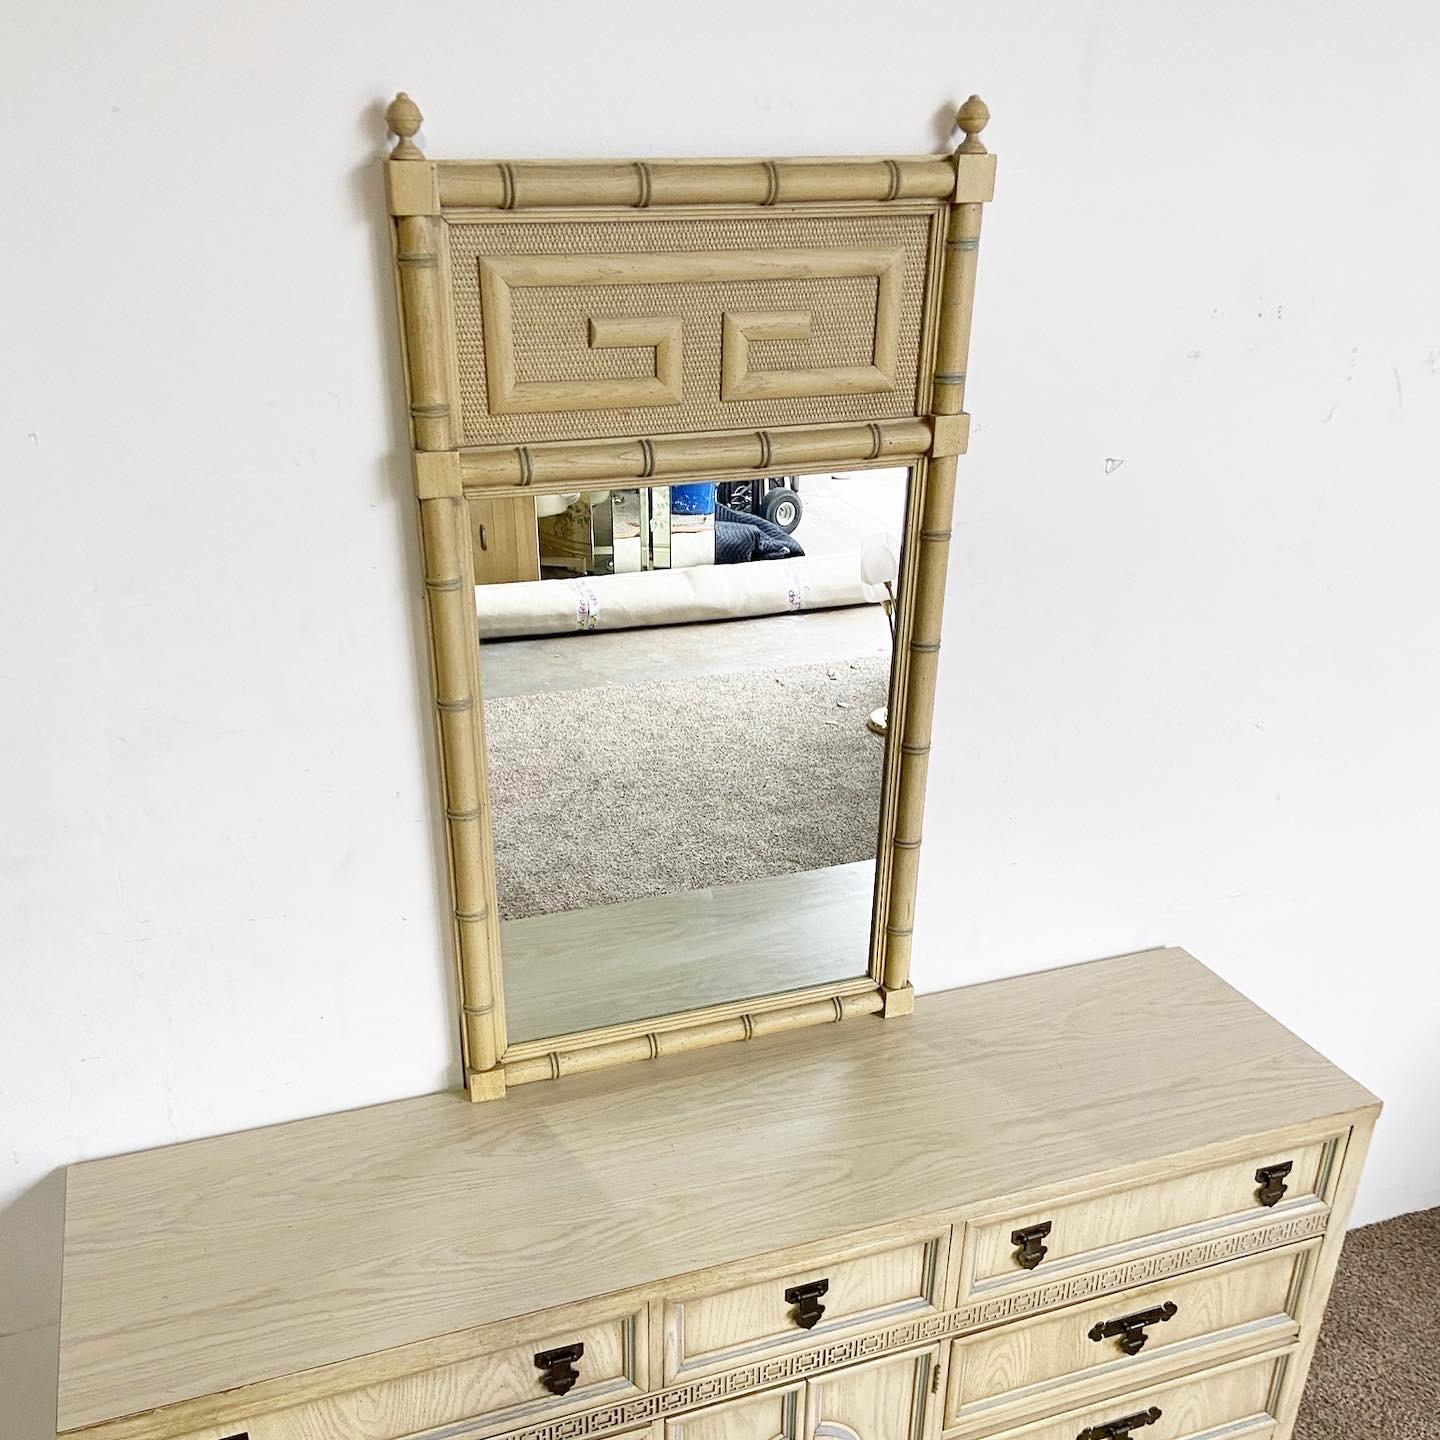 Experience Eastern elegance with our Chinoiserie Shangri-La Dresser With Mirror by Dixie, combining intricate detailing, brass accents, and practicality.

Crafted with intricate detailing, a hallmark of Chinoiserie design.
Enhanced by brass accents